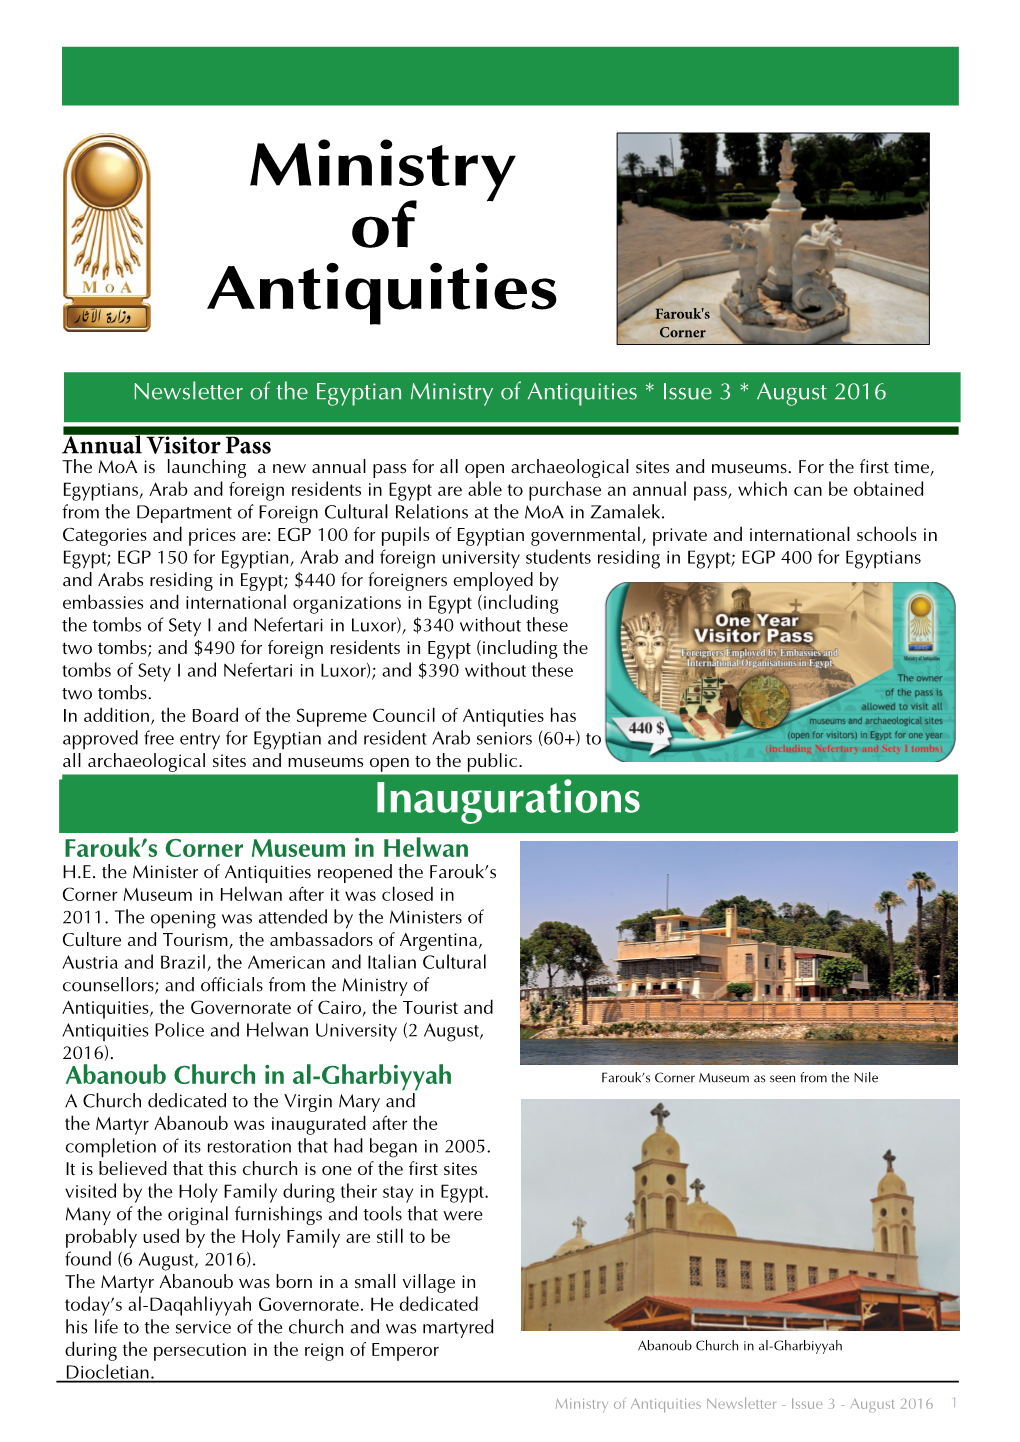 Newsletter Egyptian Ministry of Antiquities No. 3